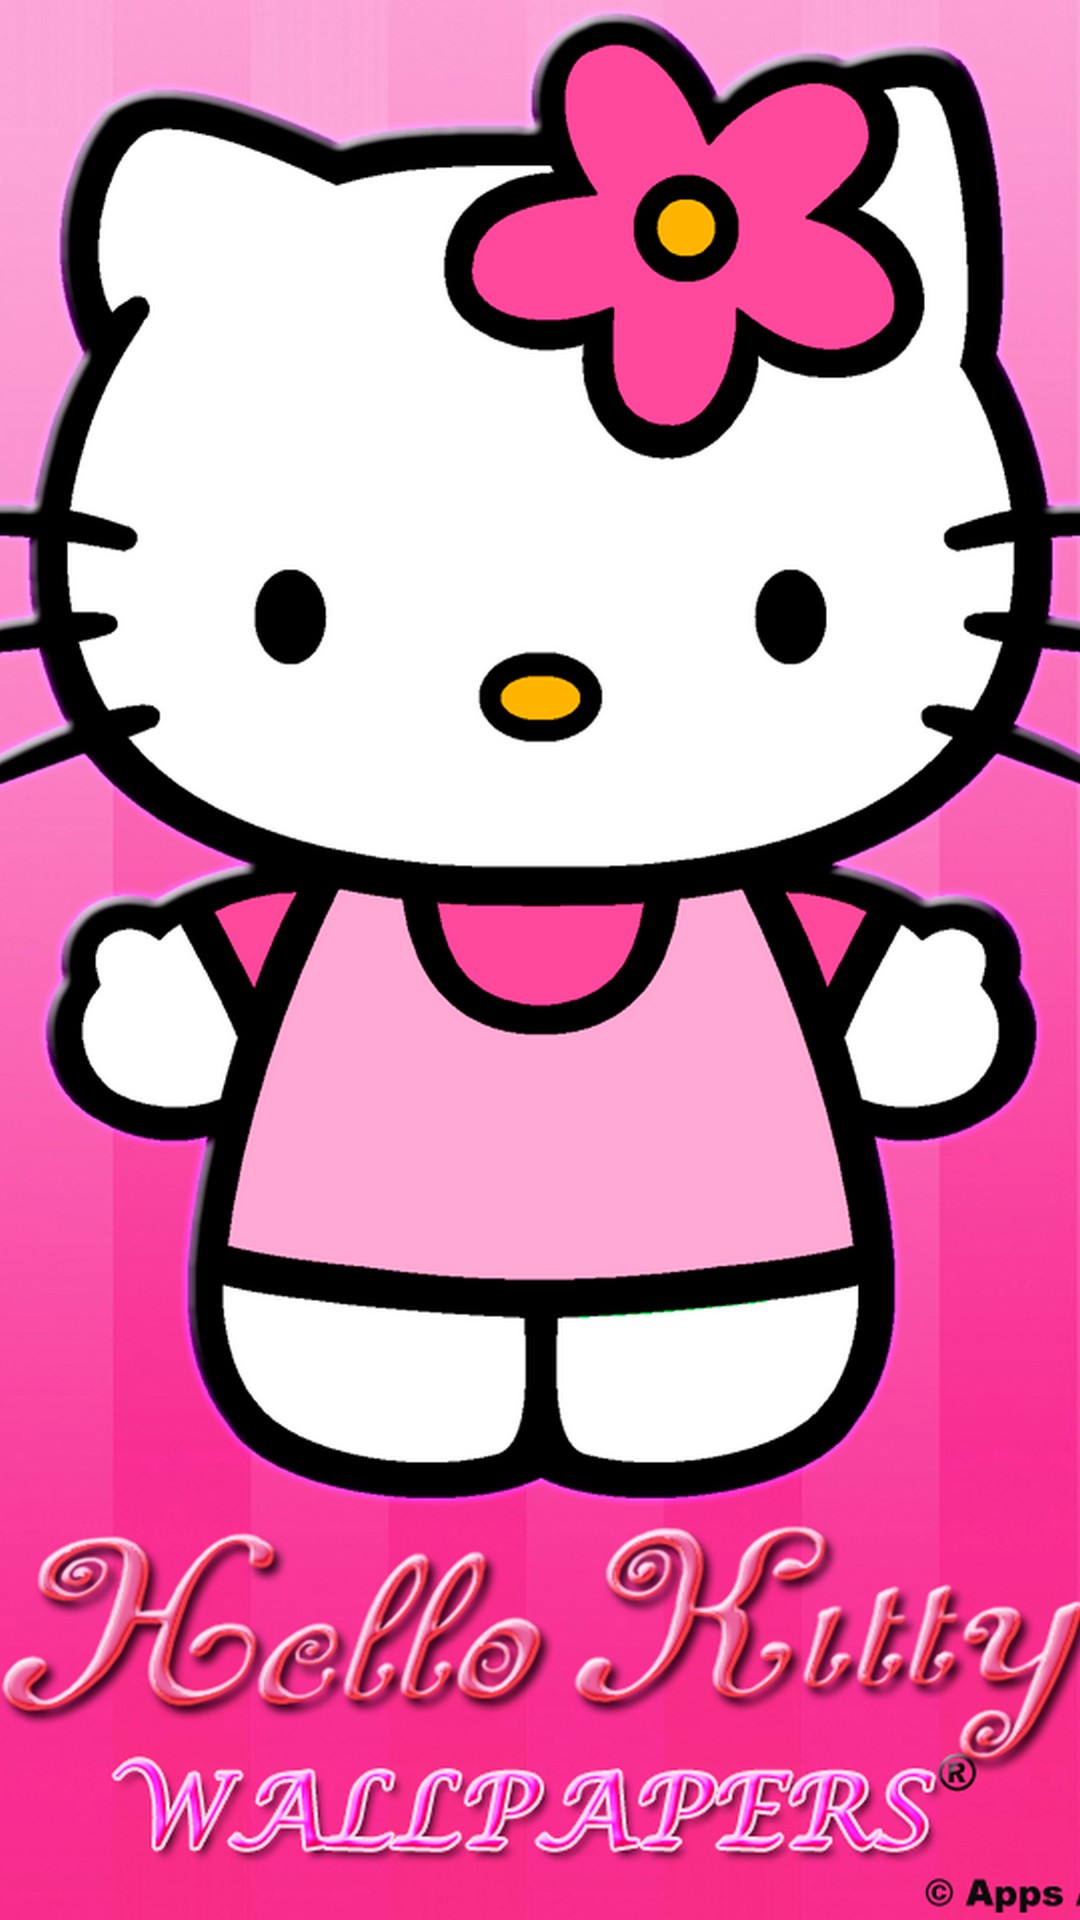 iPhone Wallpaper HD Hello Kitty with image resolution 1080x1920 pixel. You can make this wallpaper for your Desktop Computer Backgrounds, Mac Wallpapers, Android Lock screen or iPhone Screensavers